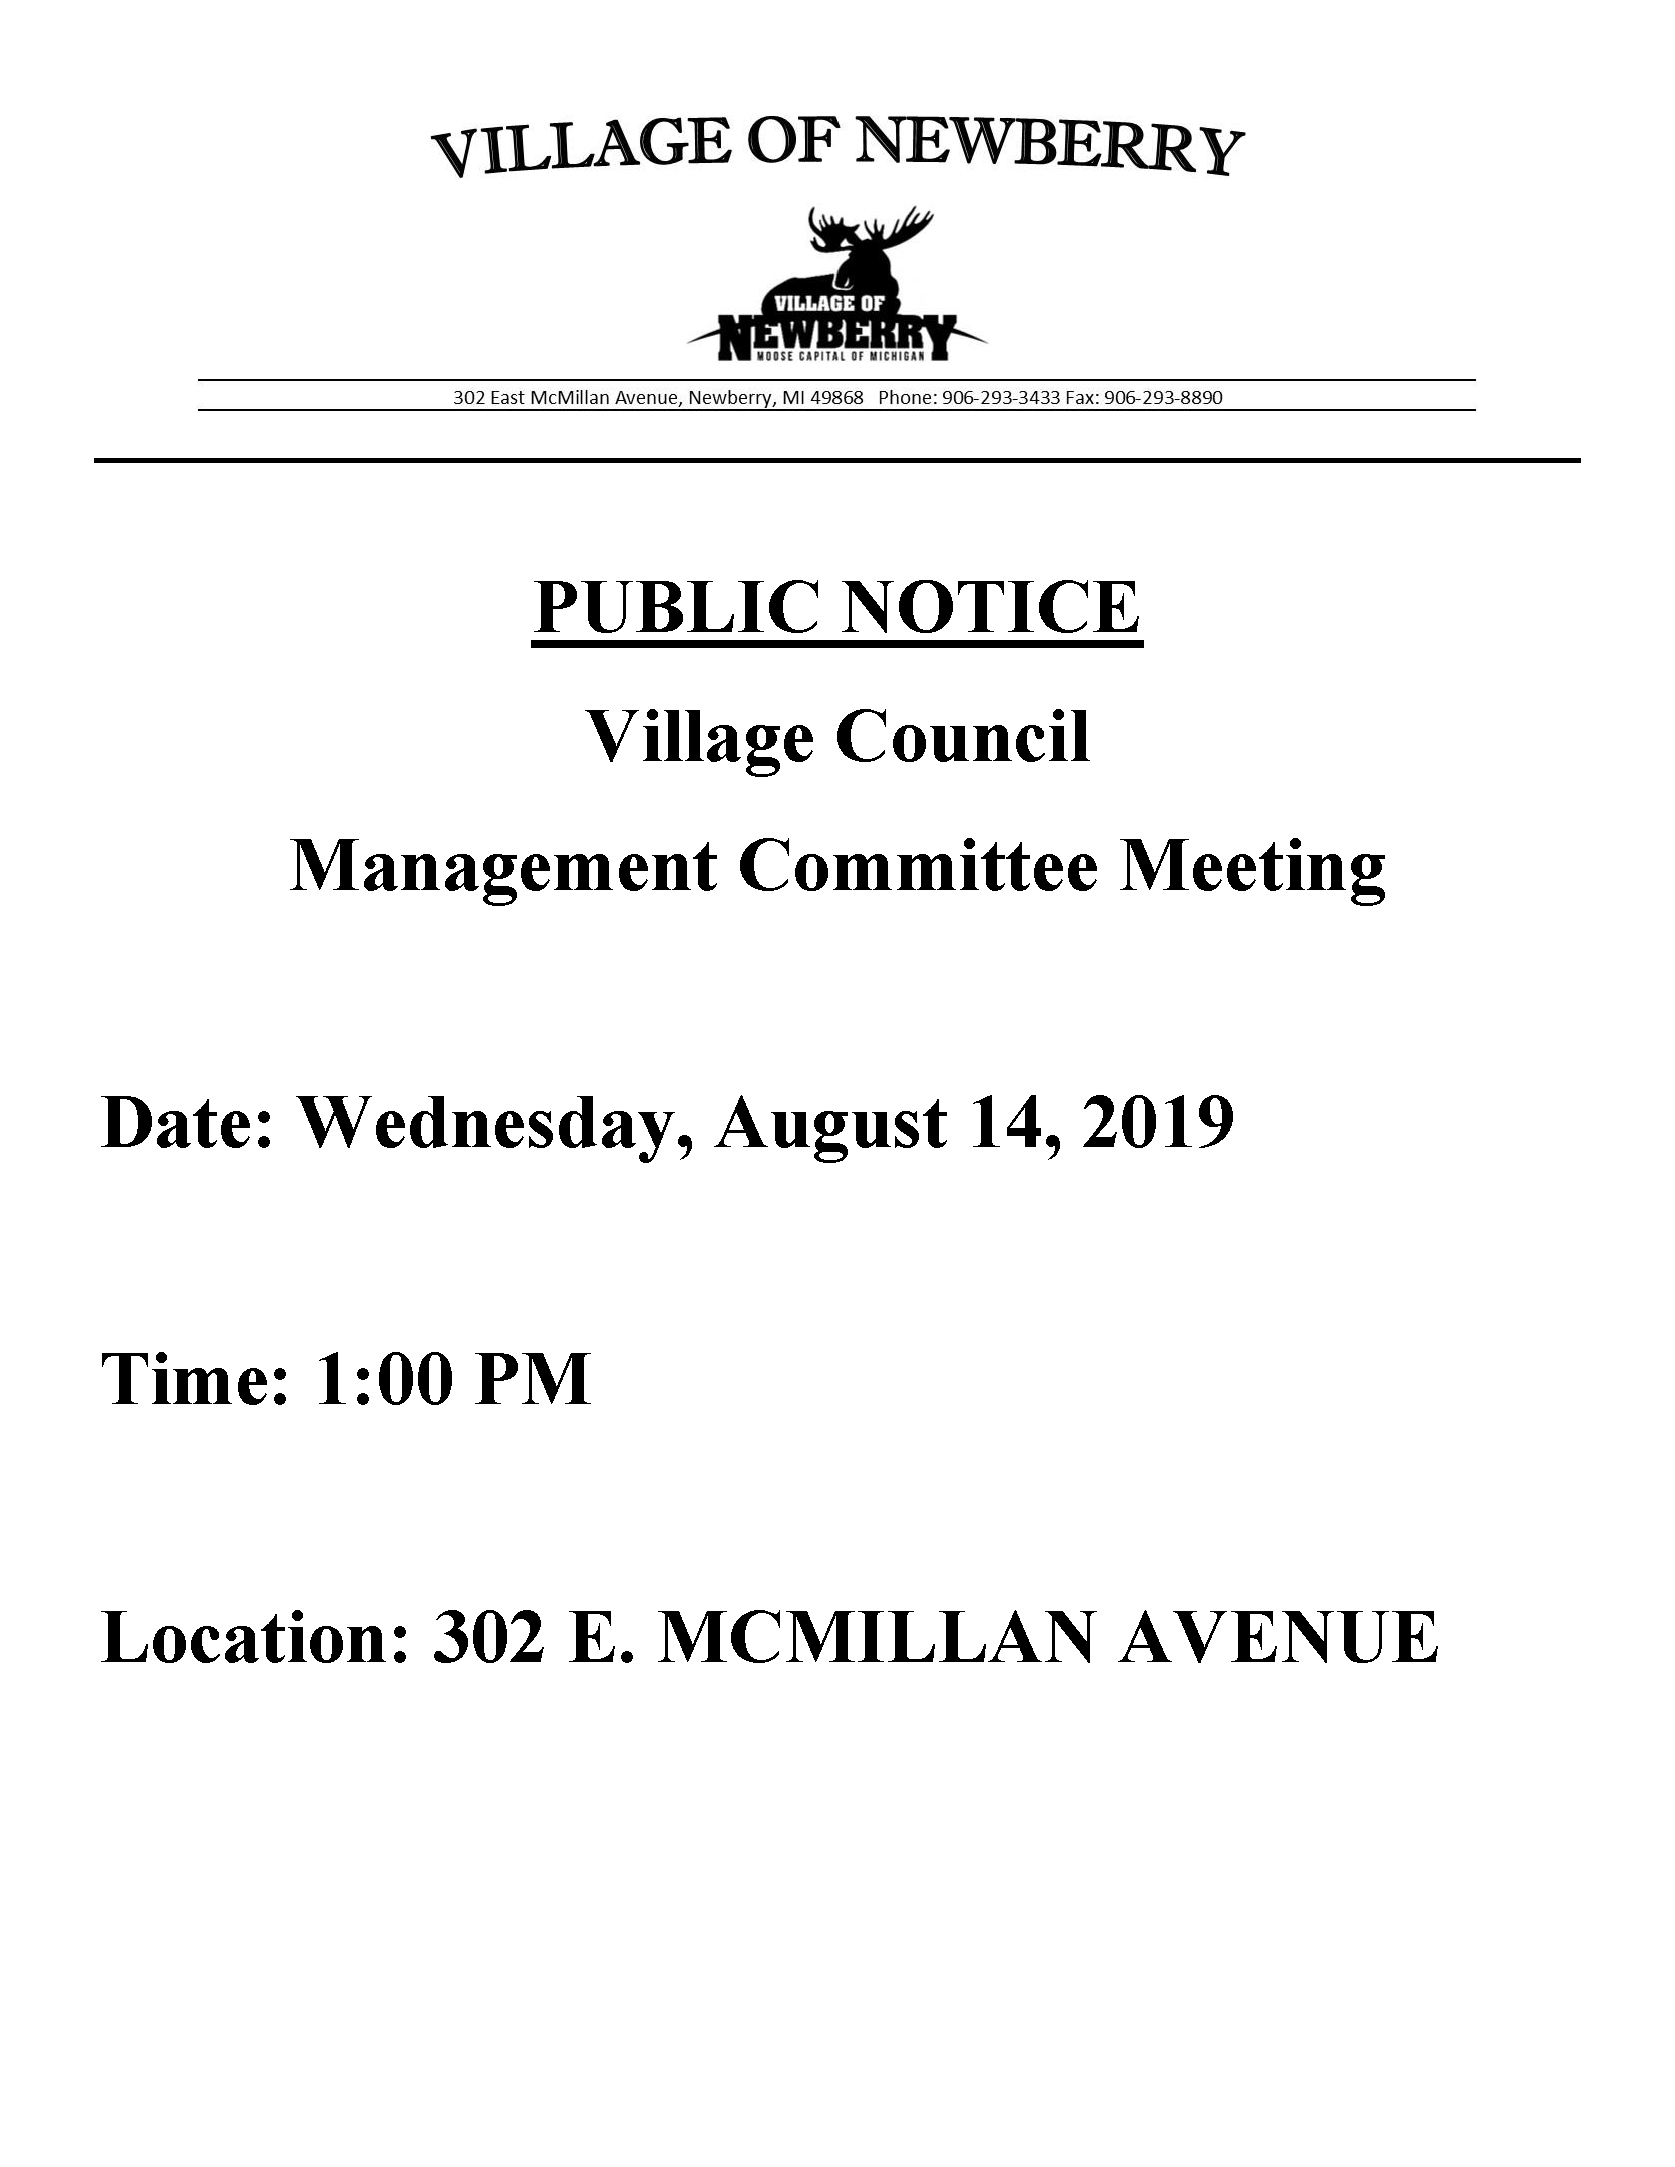 Management_Committee_Meeting_Notice_8.06